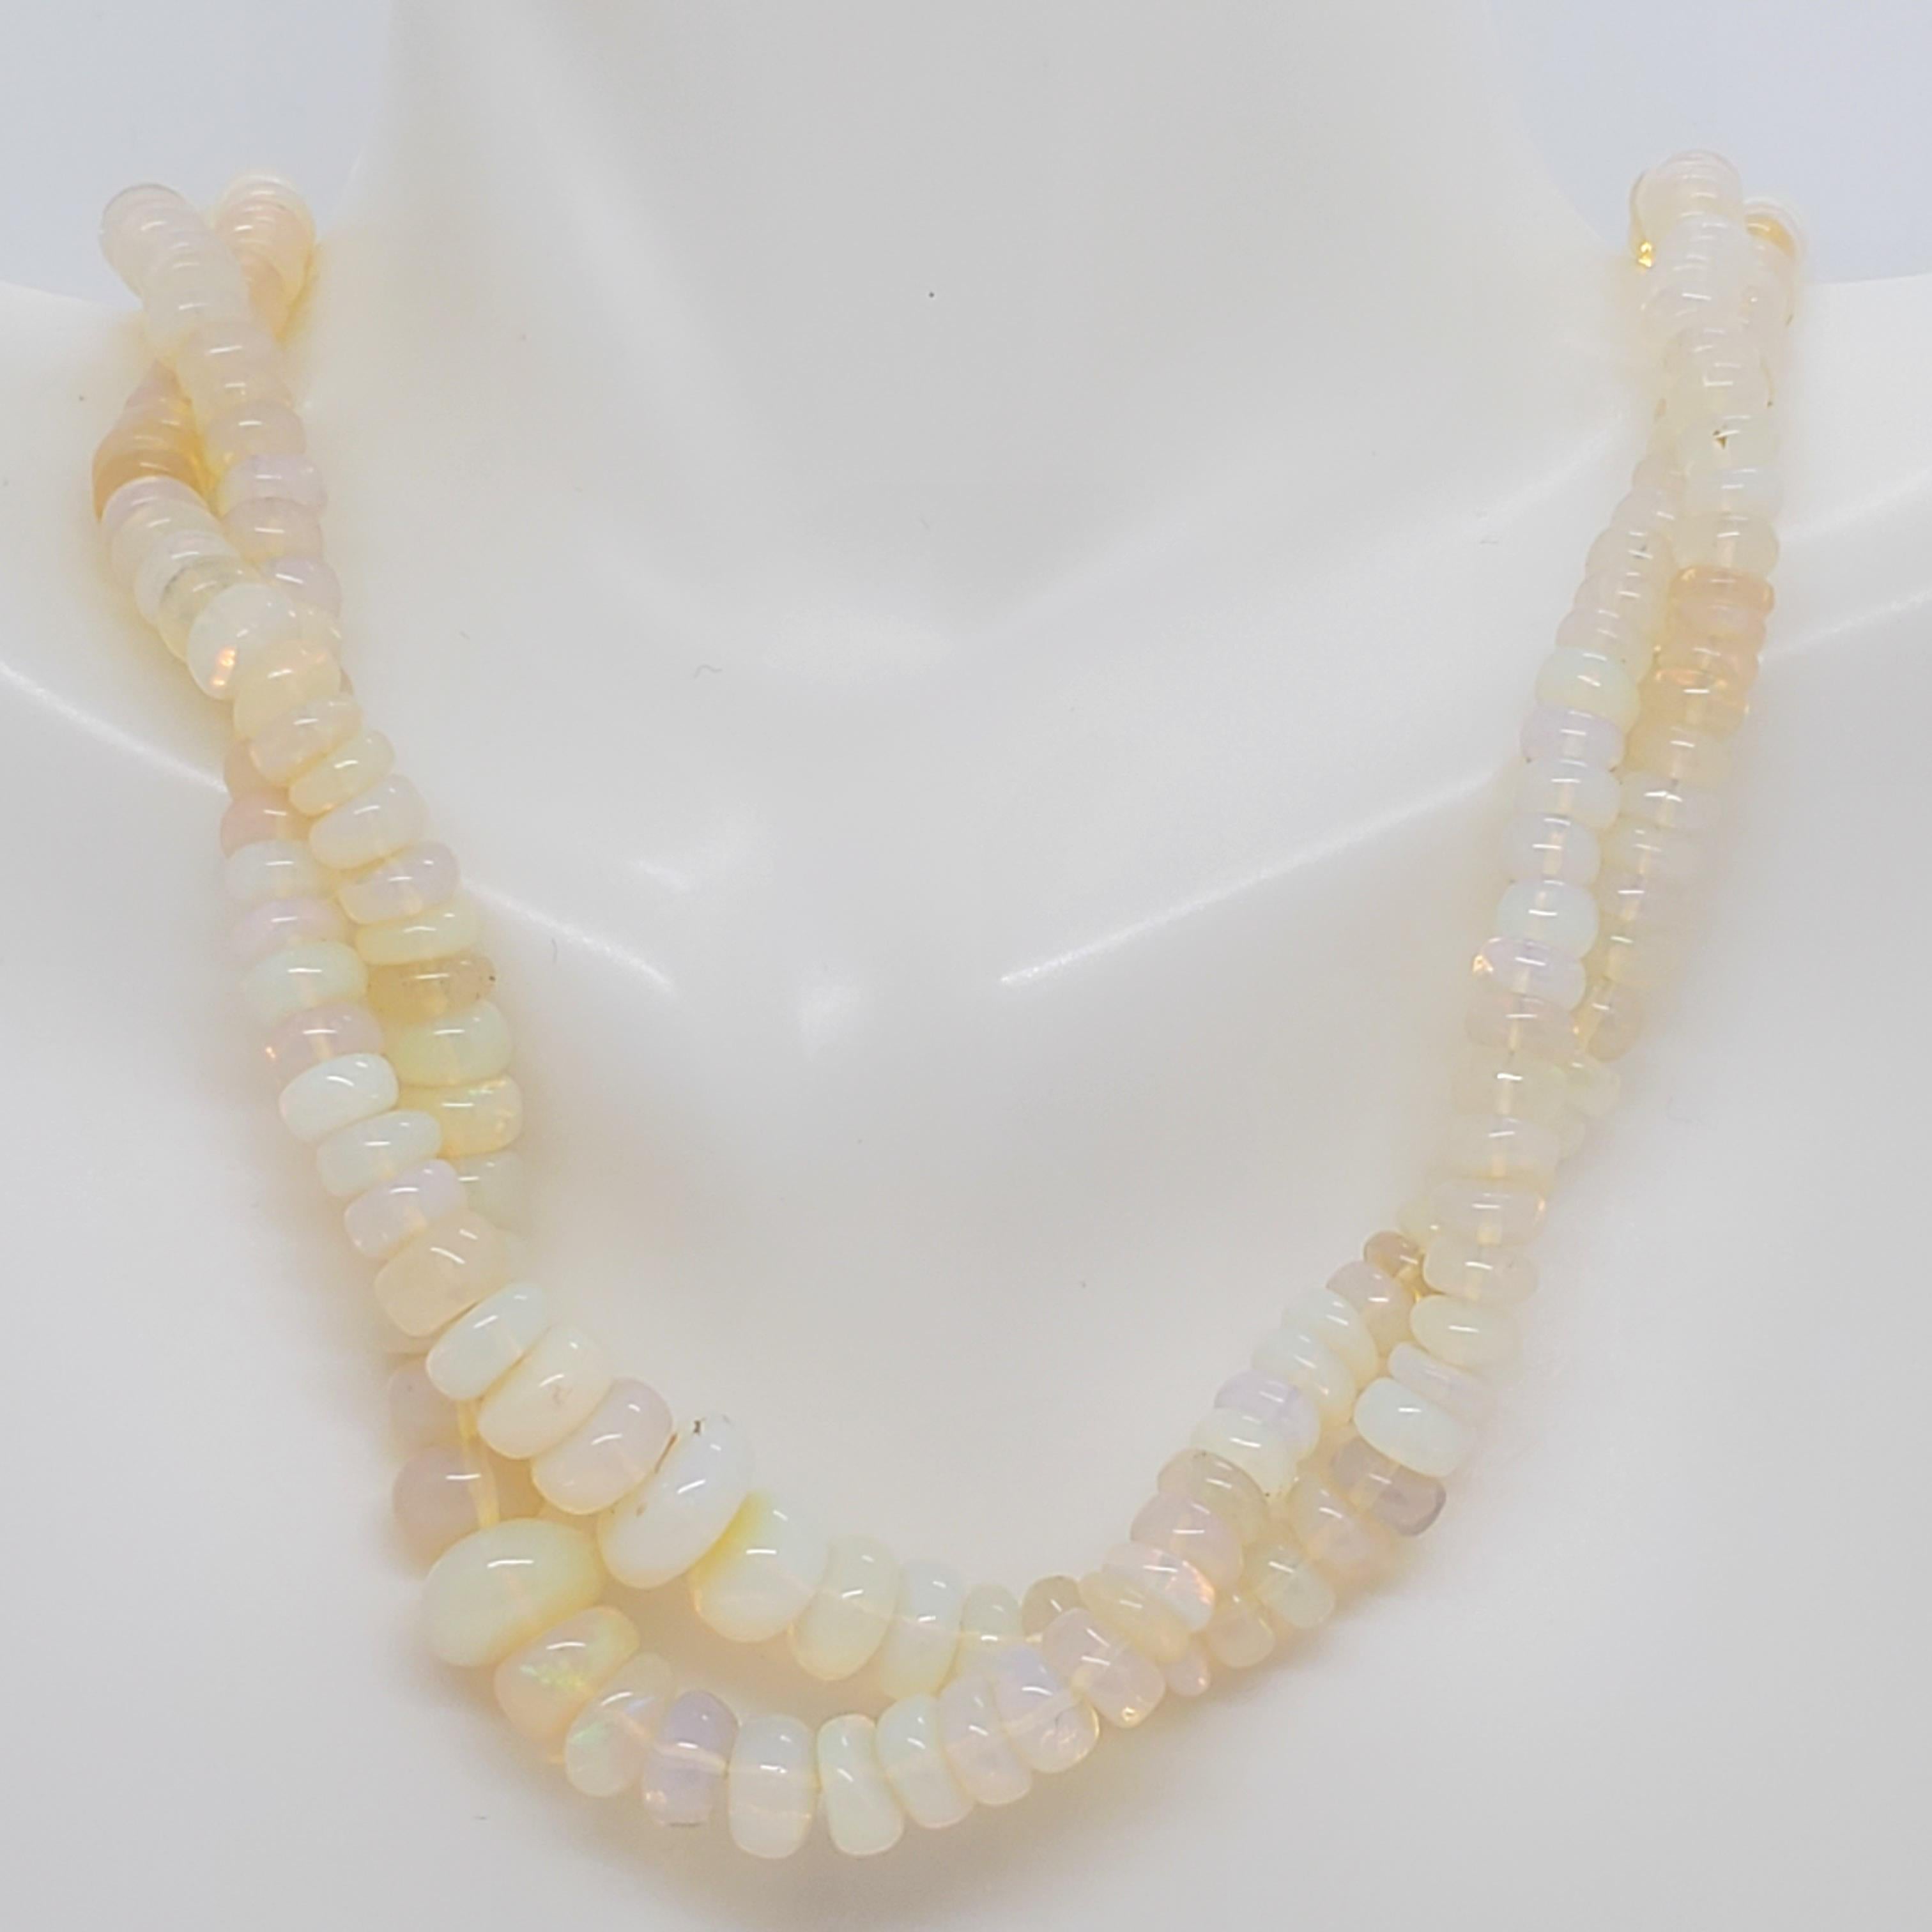 Beautiful necklace with 2 strands of white opal beads and a very nice 18k yellow gold clasp that has 0.15 ct. white diamond rounds.  Length is 16